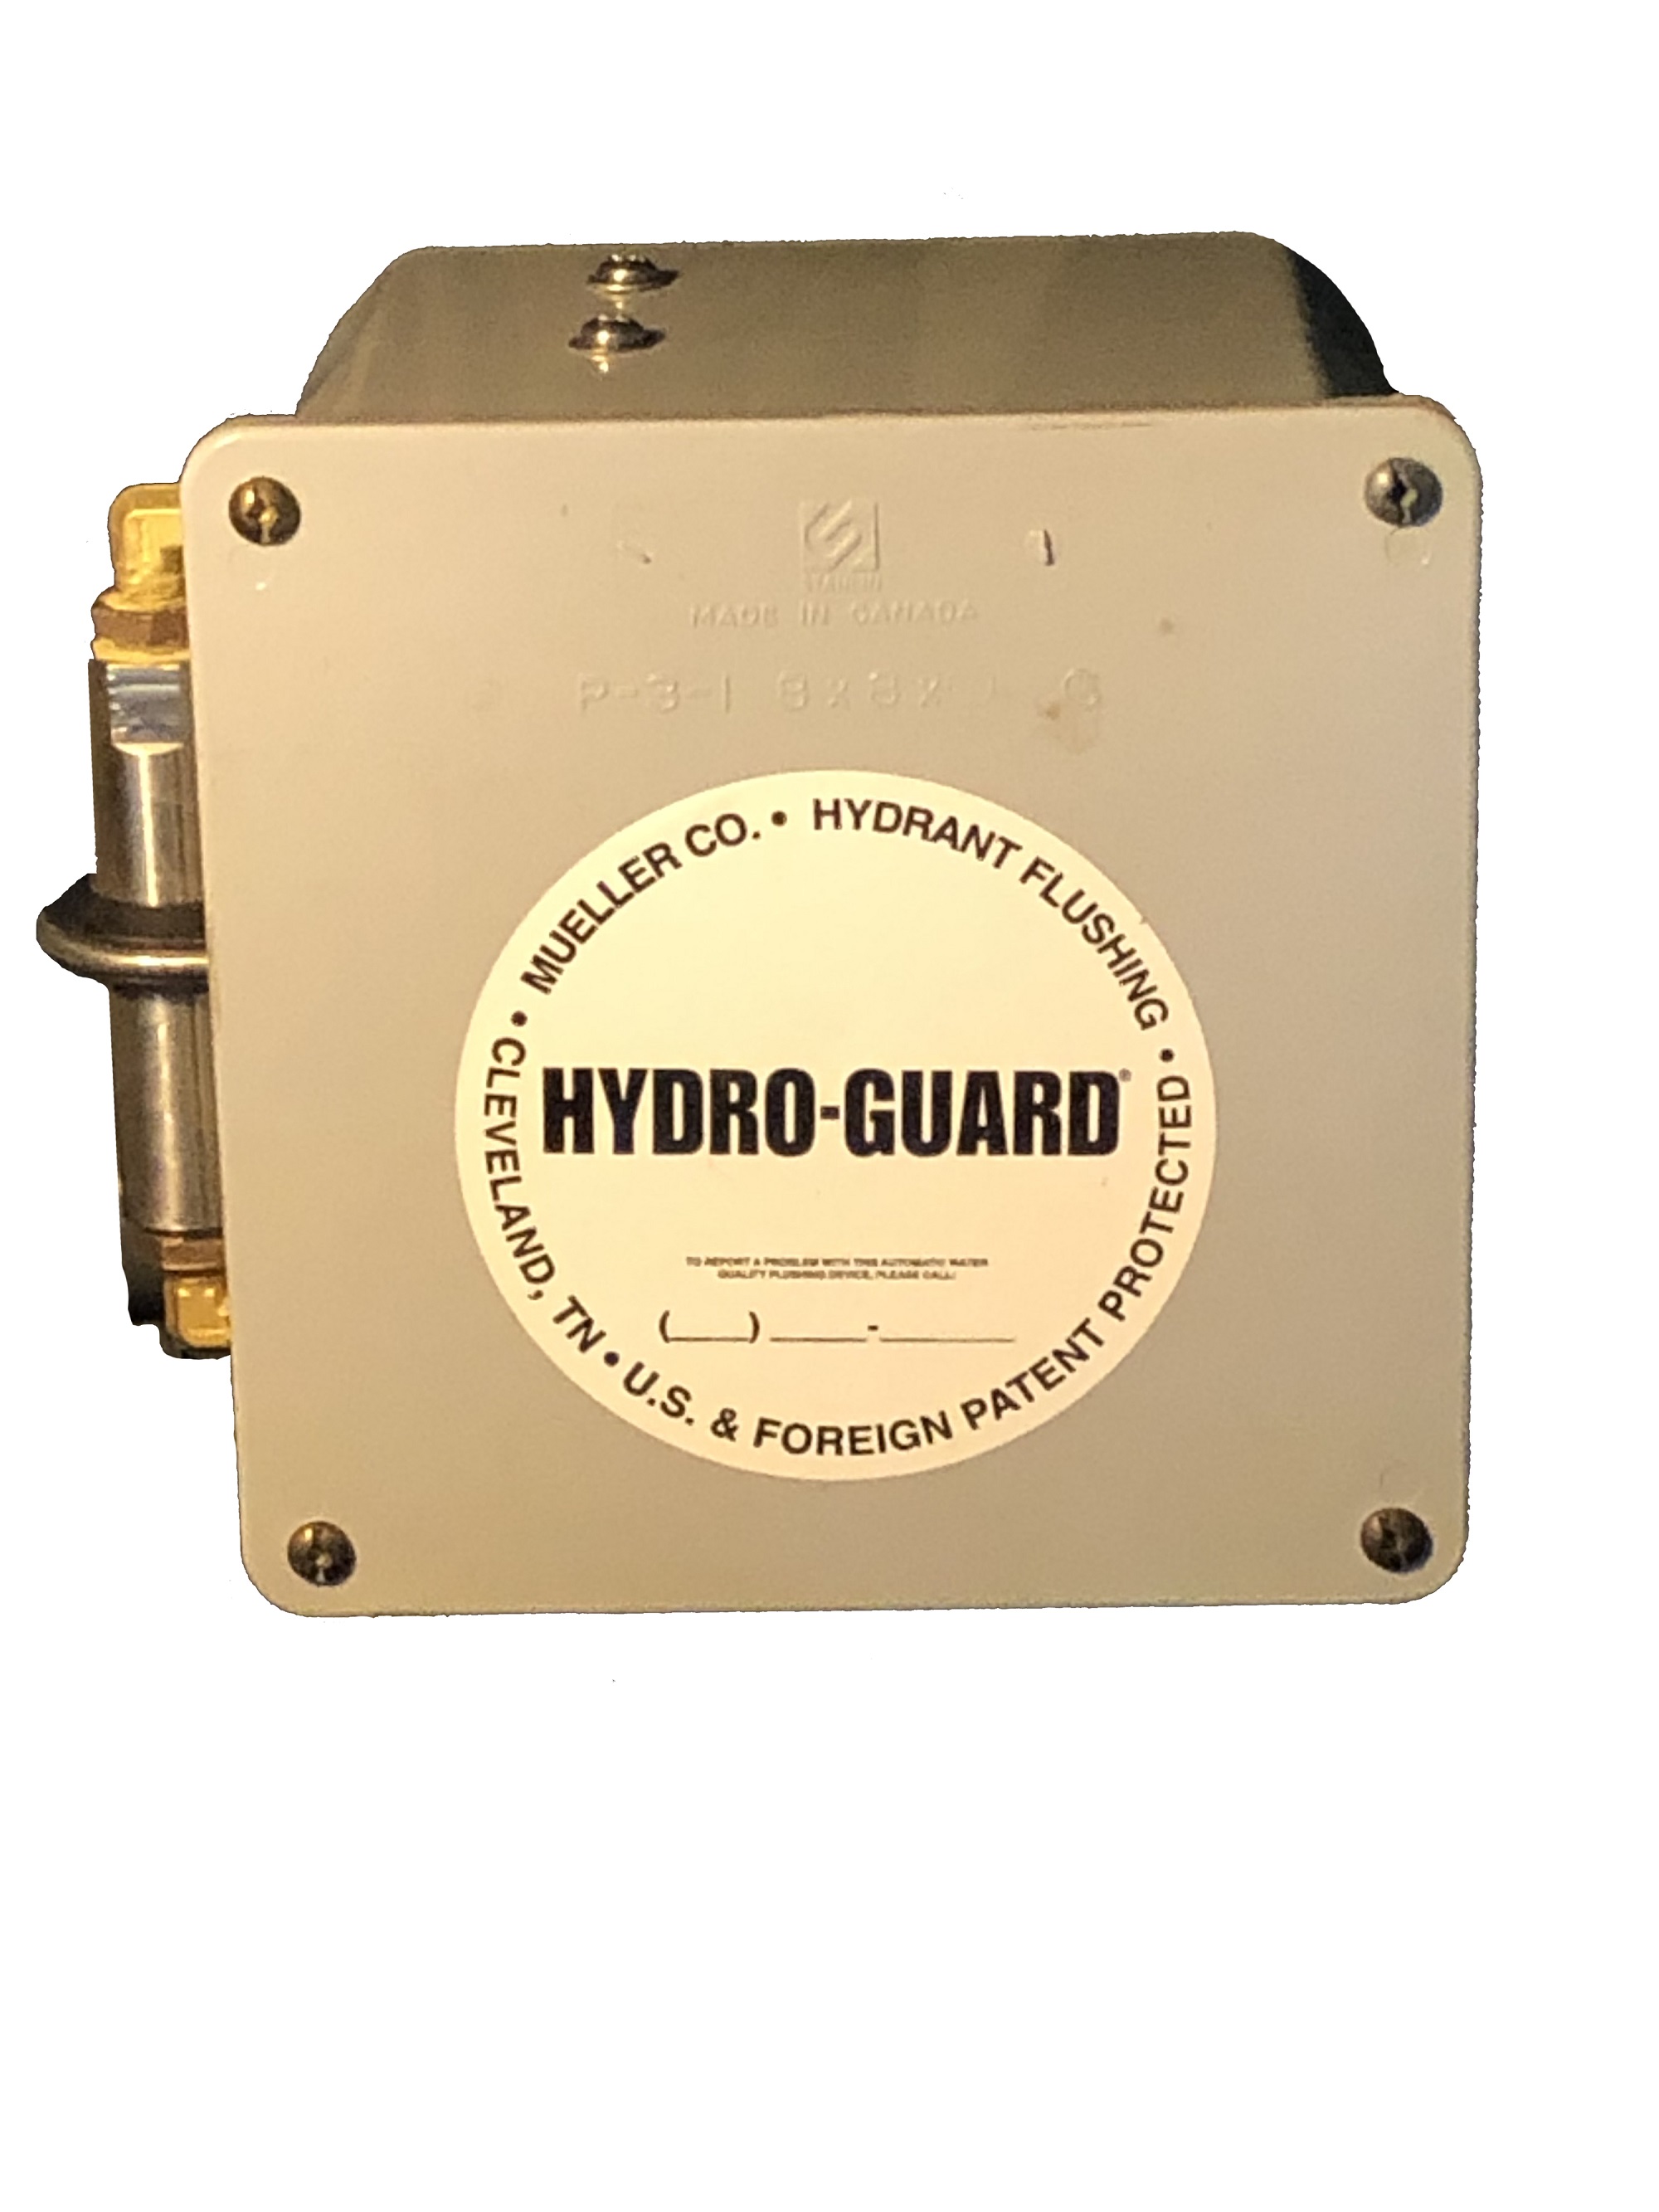 The Hydro-Guard Industrial Flushing System ensures water is pushed through the system at a sufficiently high velocity to eliminate stagnant water.